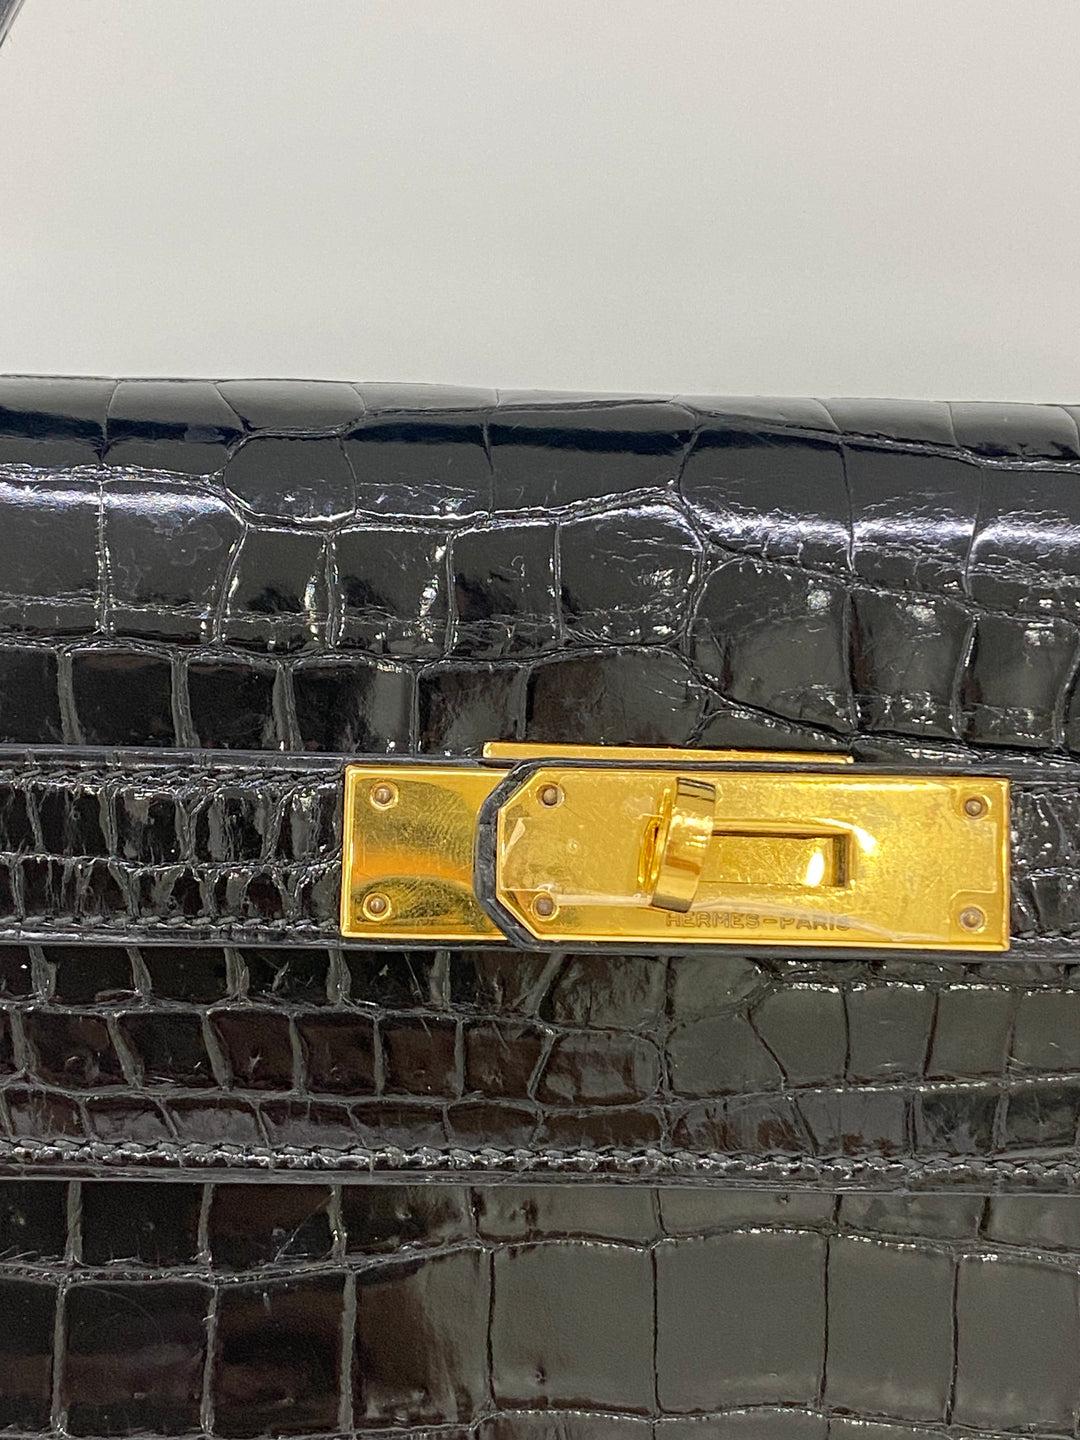 Condition: Good used 

Colour: Black

Leather: Alligator 

Stamp/Year: 1994

Hardware Colour: Gold

Inclusion: Dust bag, receipt, keys, raincoat

Origin: France

Authenticity: Authenticity Guaranteed or fully refundable

Shipping: Express Shipping